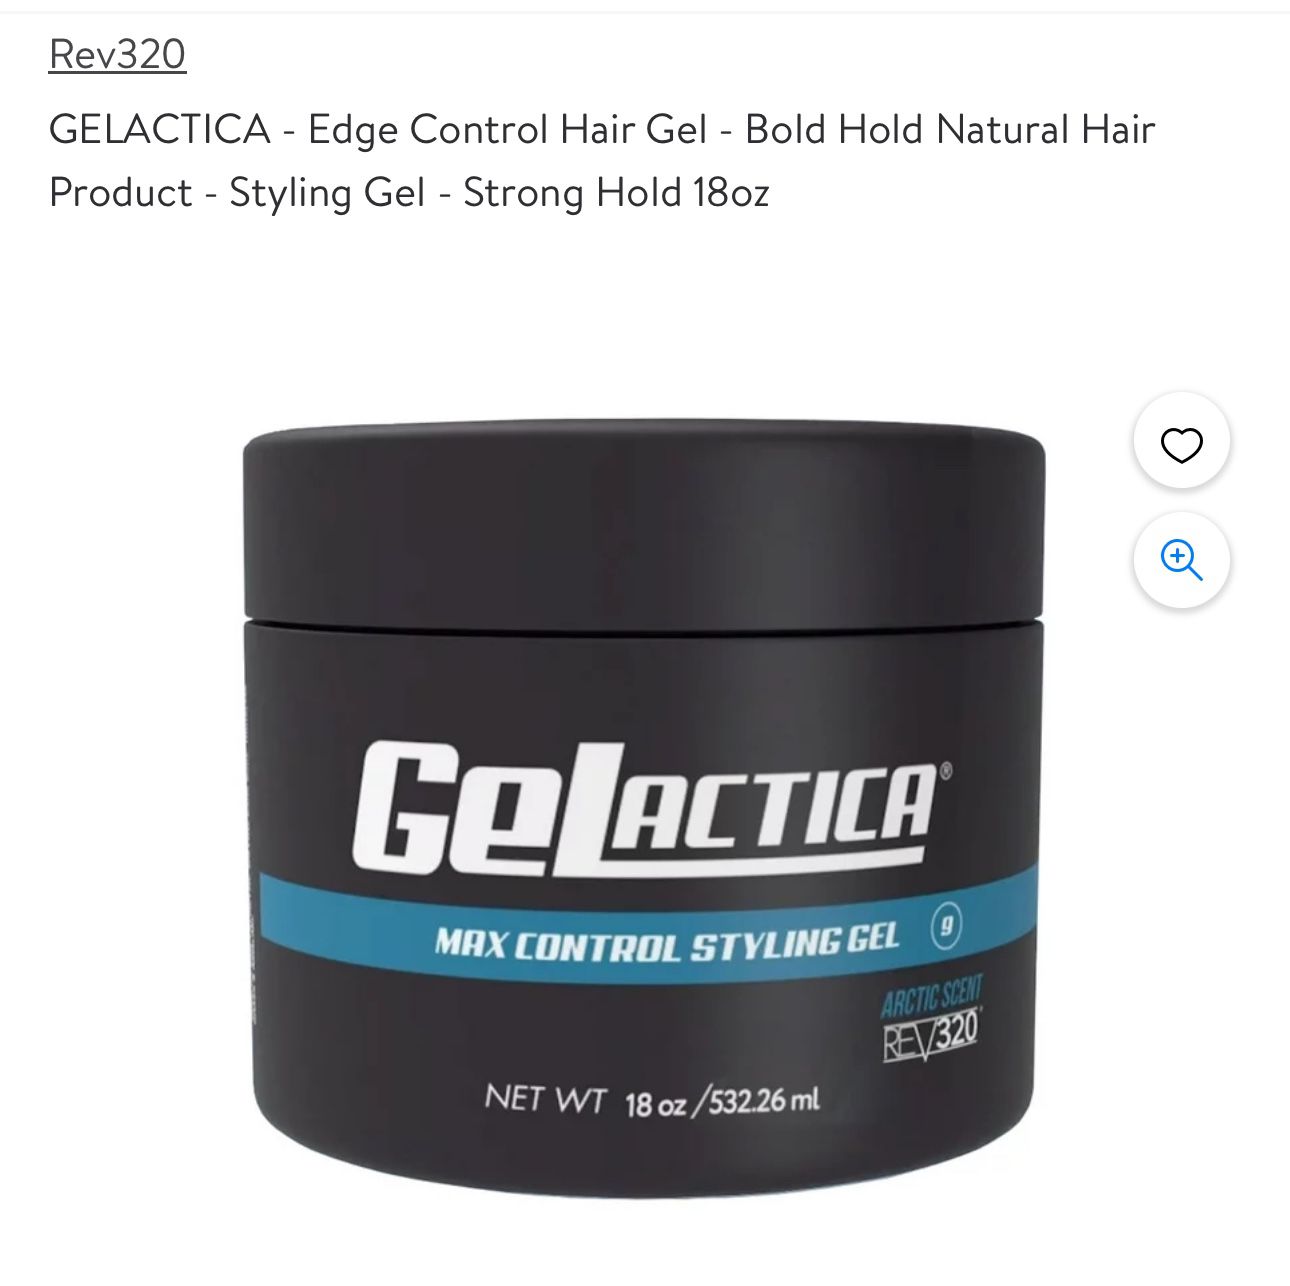 GELACTICA - Edge Control Hair Gel - Bold Hold Natural Hair Product - Styling Gel - Strong Hold 18oz